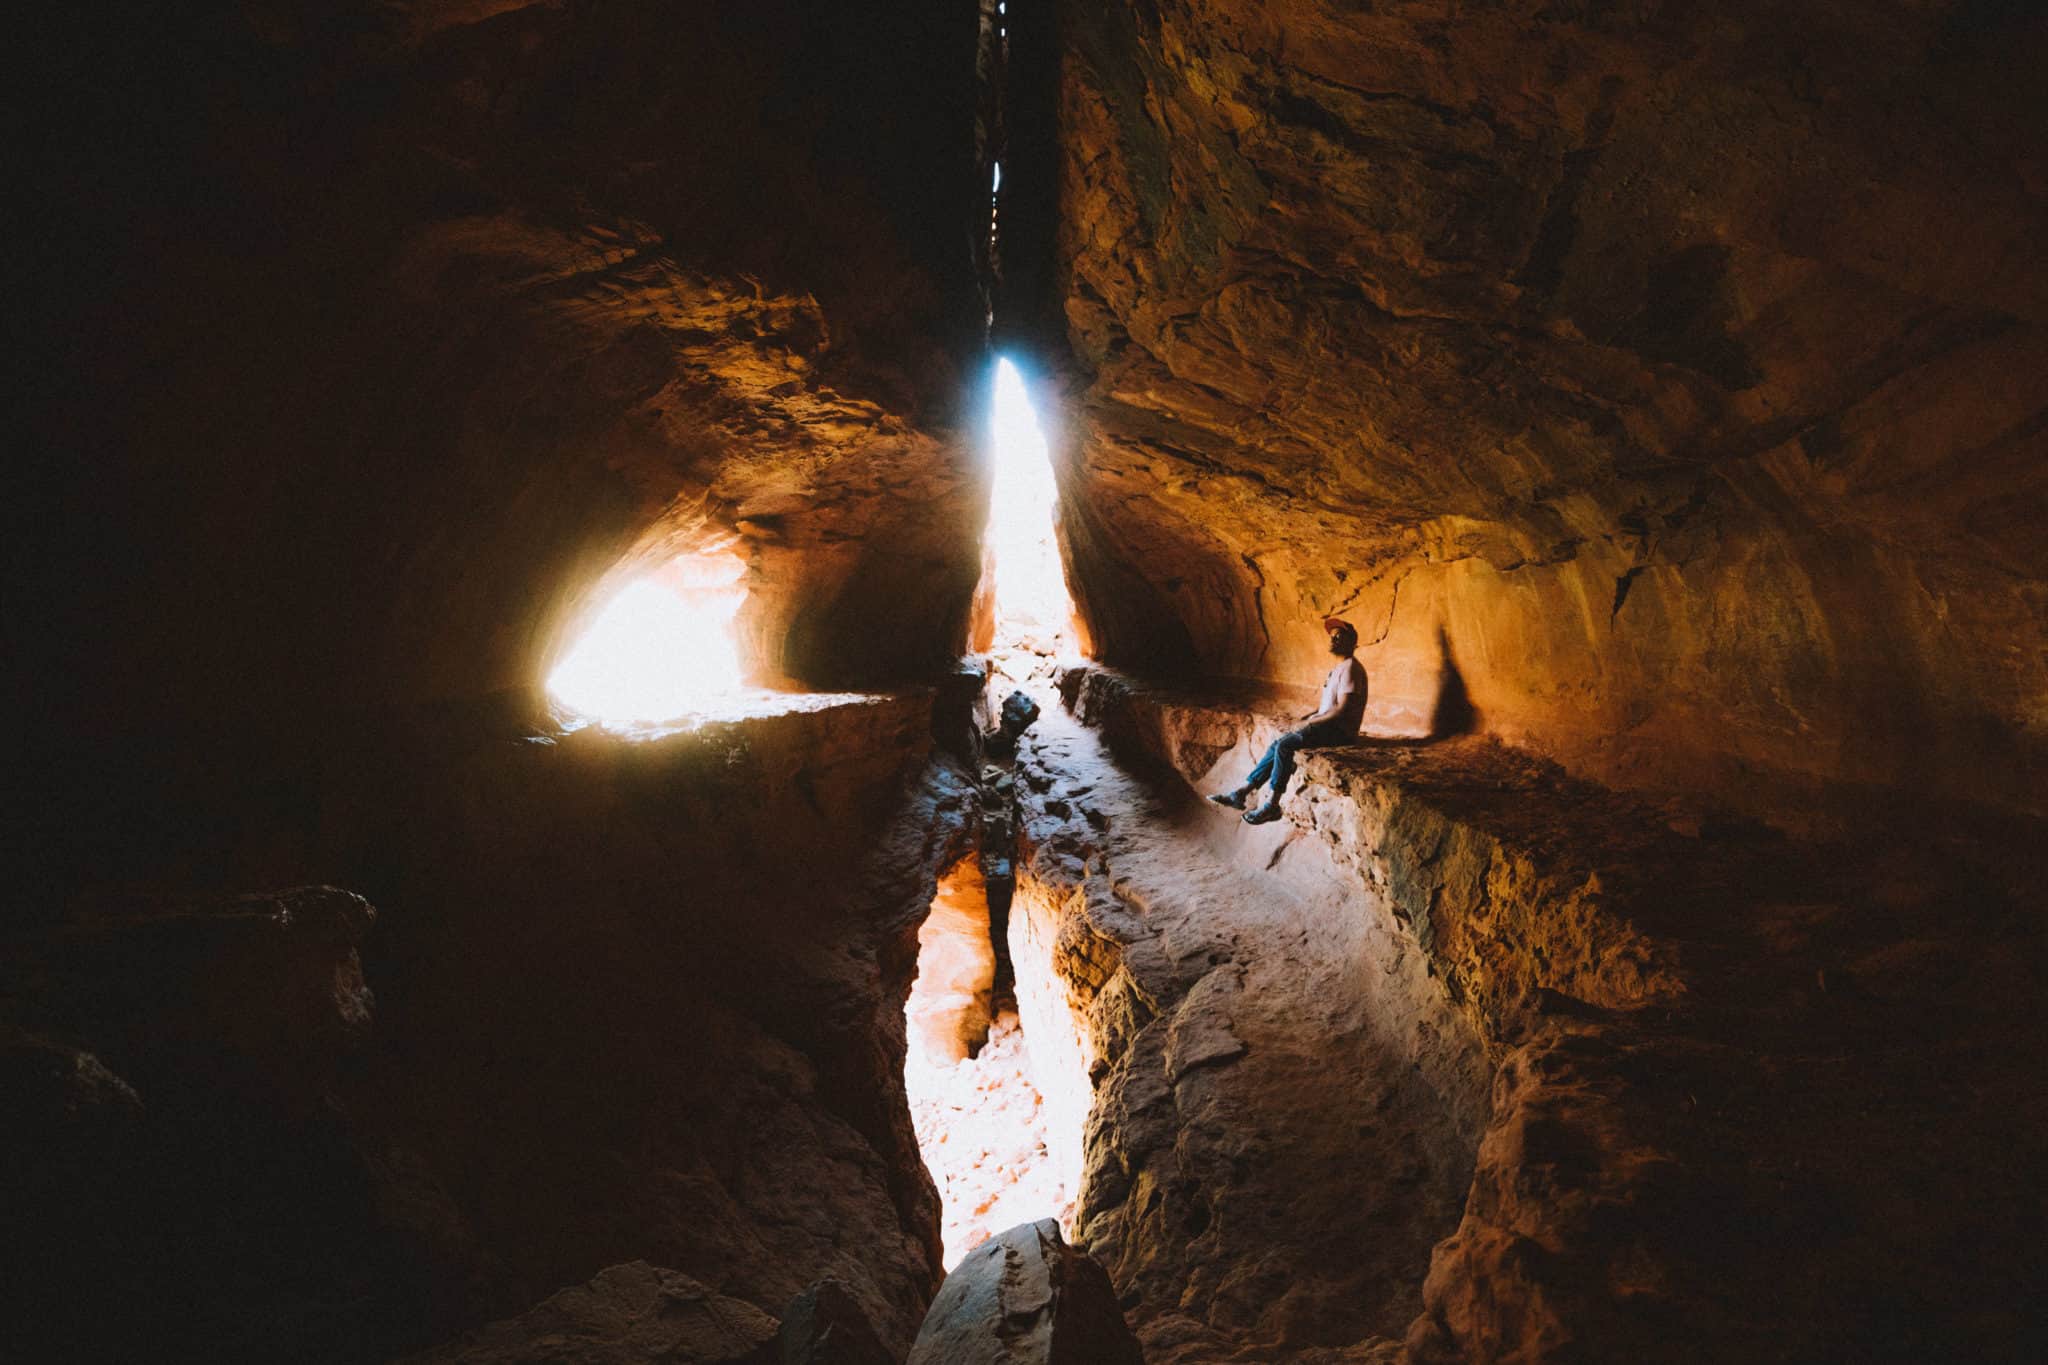 Experience Soldiers Pass Trail in Sedona: Explore Hidden Caves And Mystic Pools That Will Take Your Breath Away